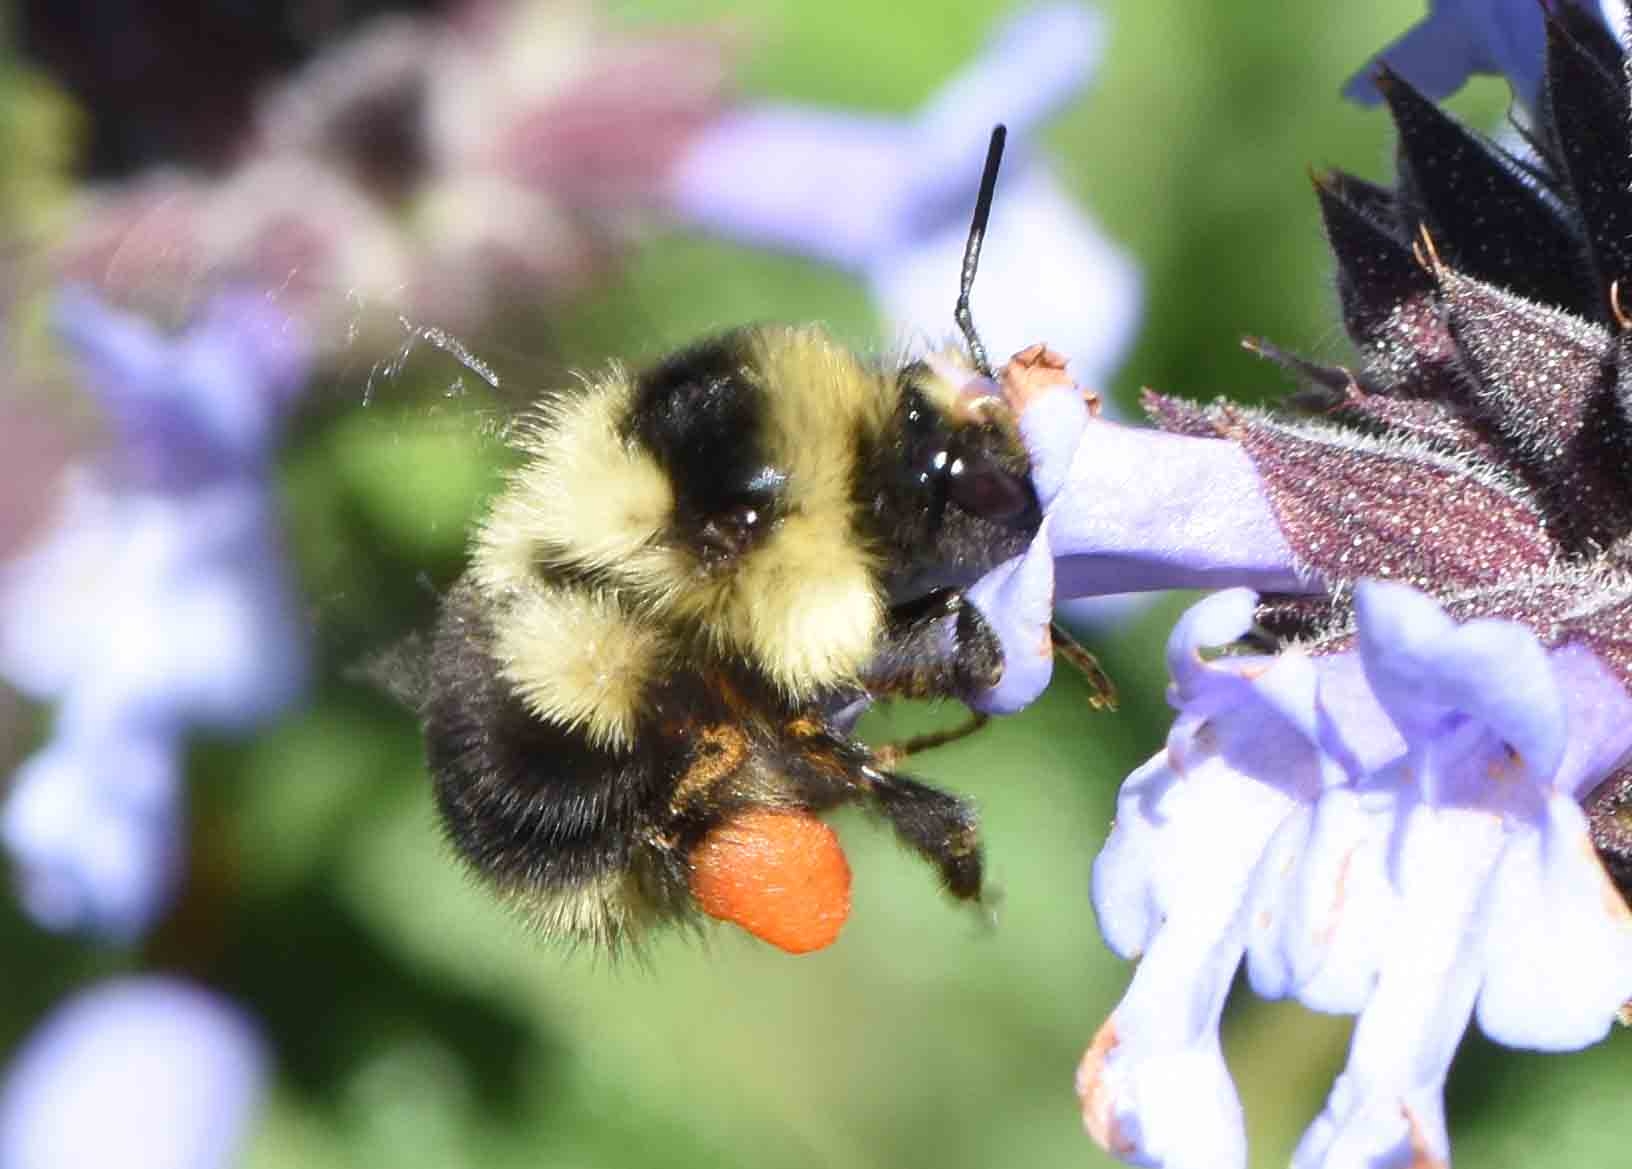 How Many Legs Do Bees Have?